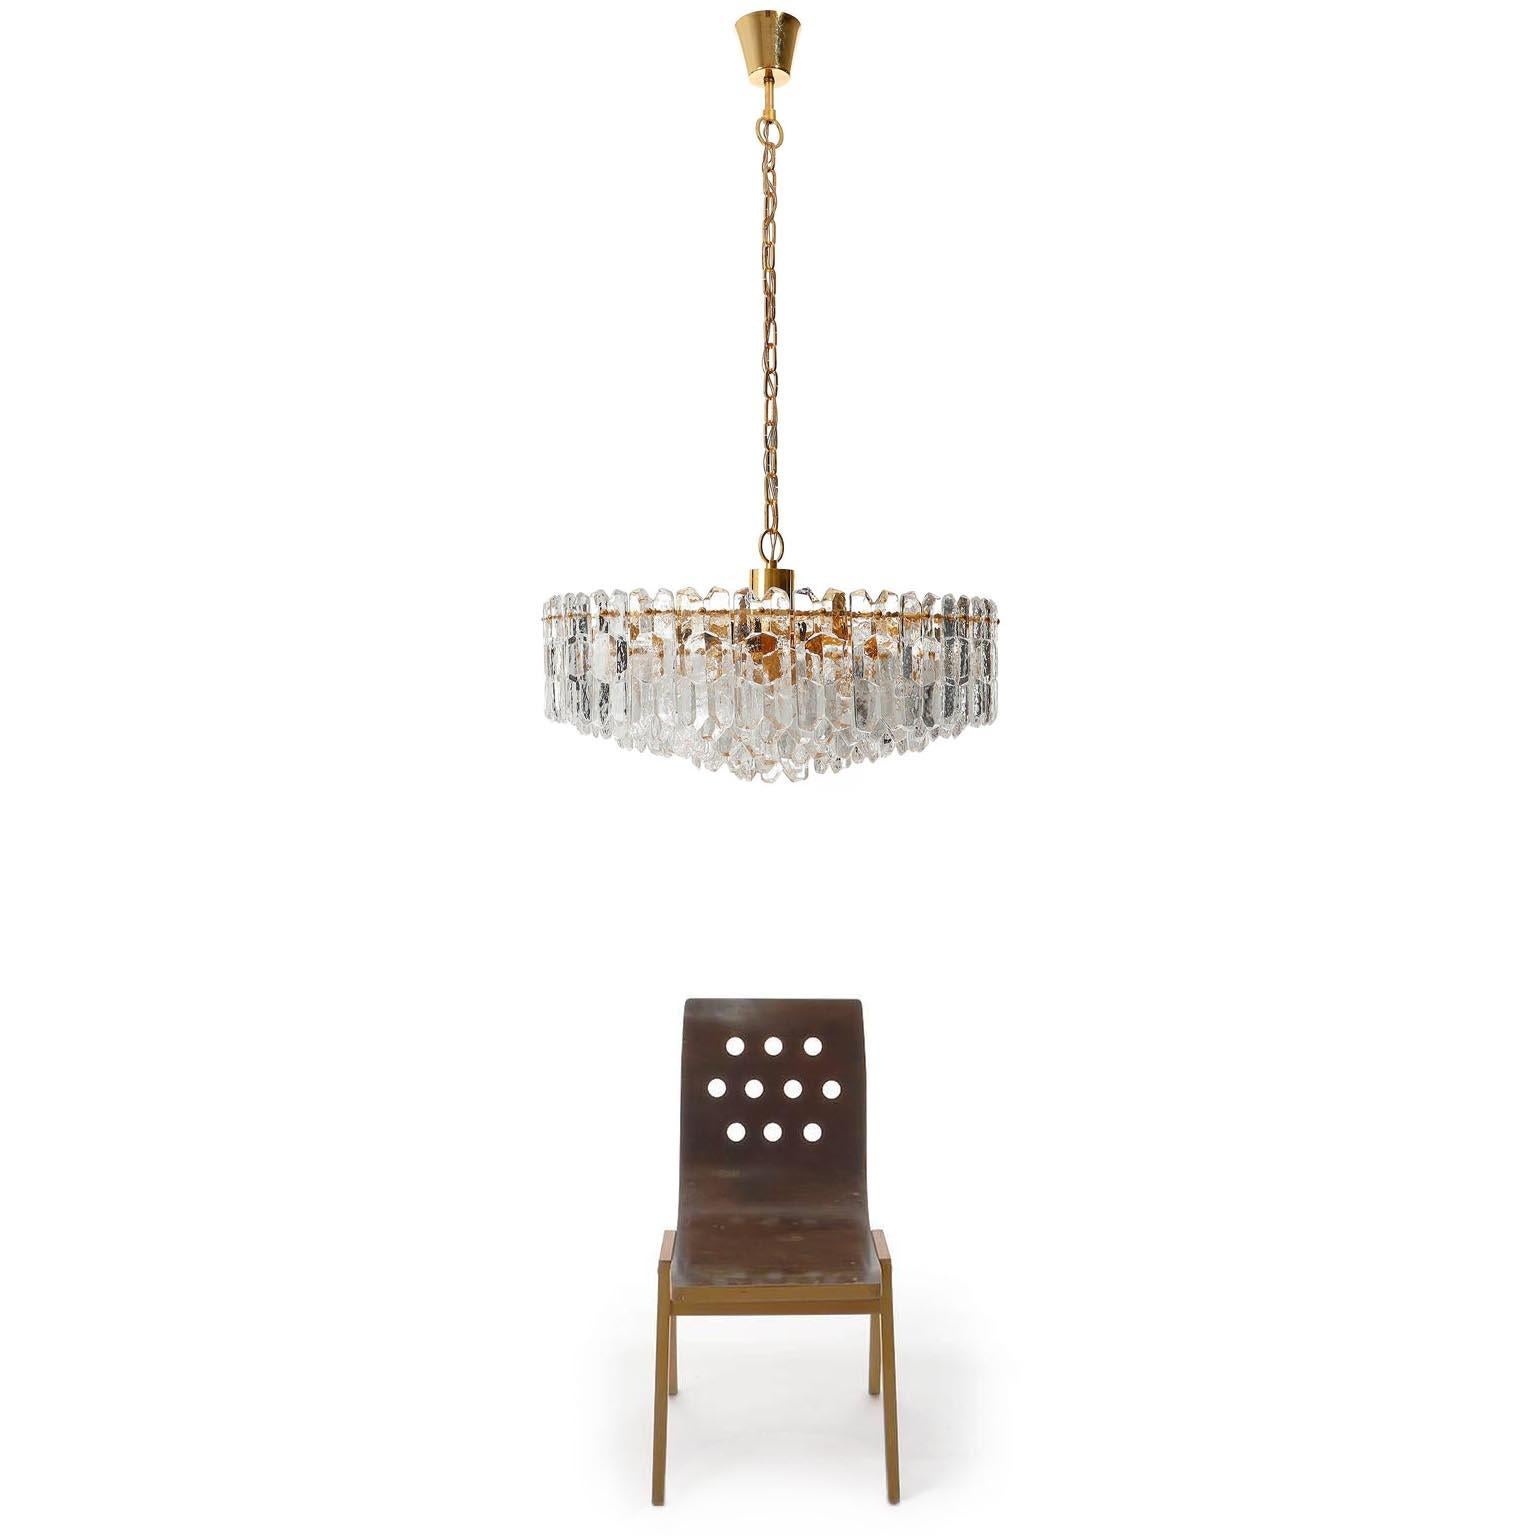 An extra large and very exquisite 24-carat gold-plated brass and clear brilliant glass 'Palazzo' chandelier by J.T. Kalmar, Vienna, Austria, manufactured in circa 1970 (late 1960s and early 1970s).
The fixture is labeled and documented in the